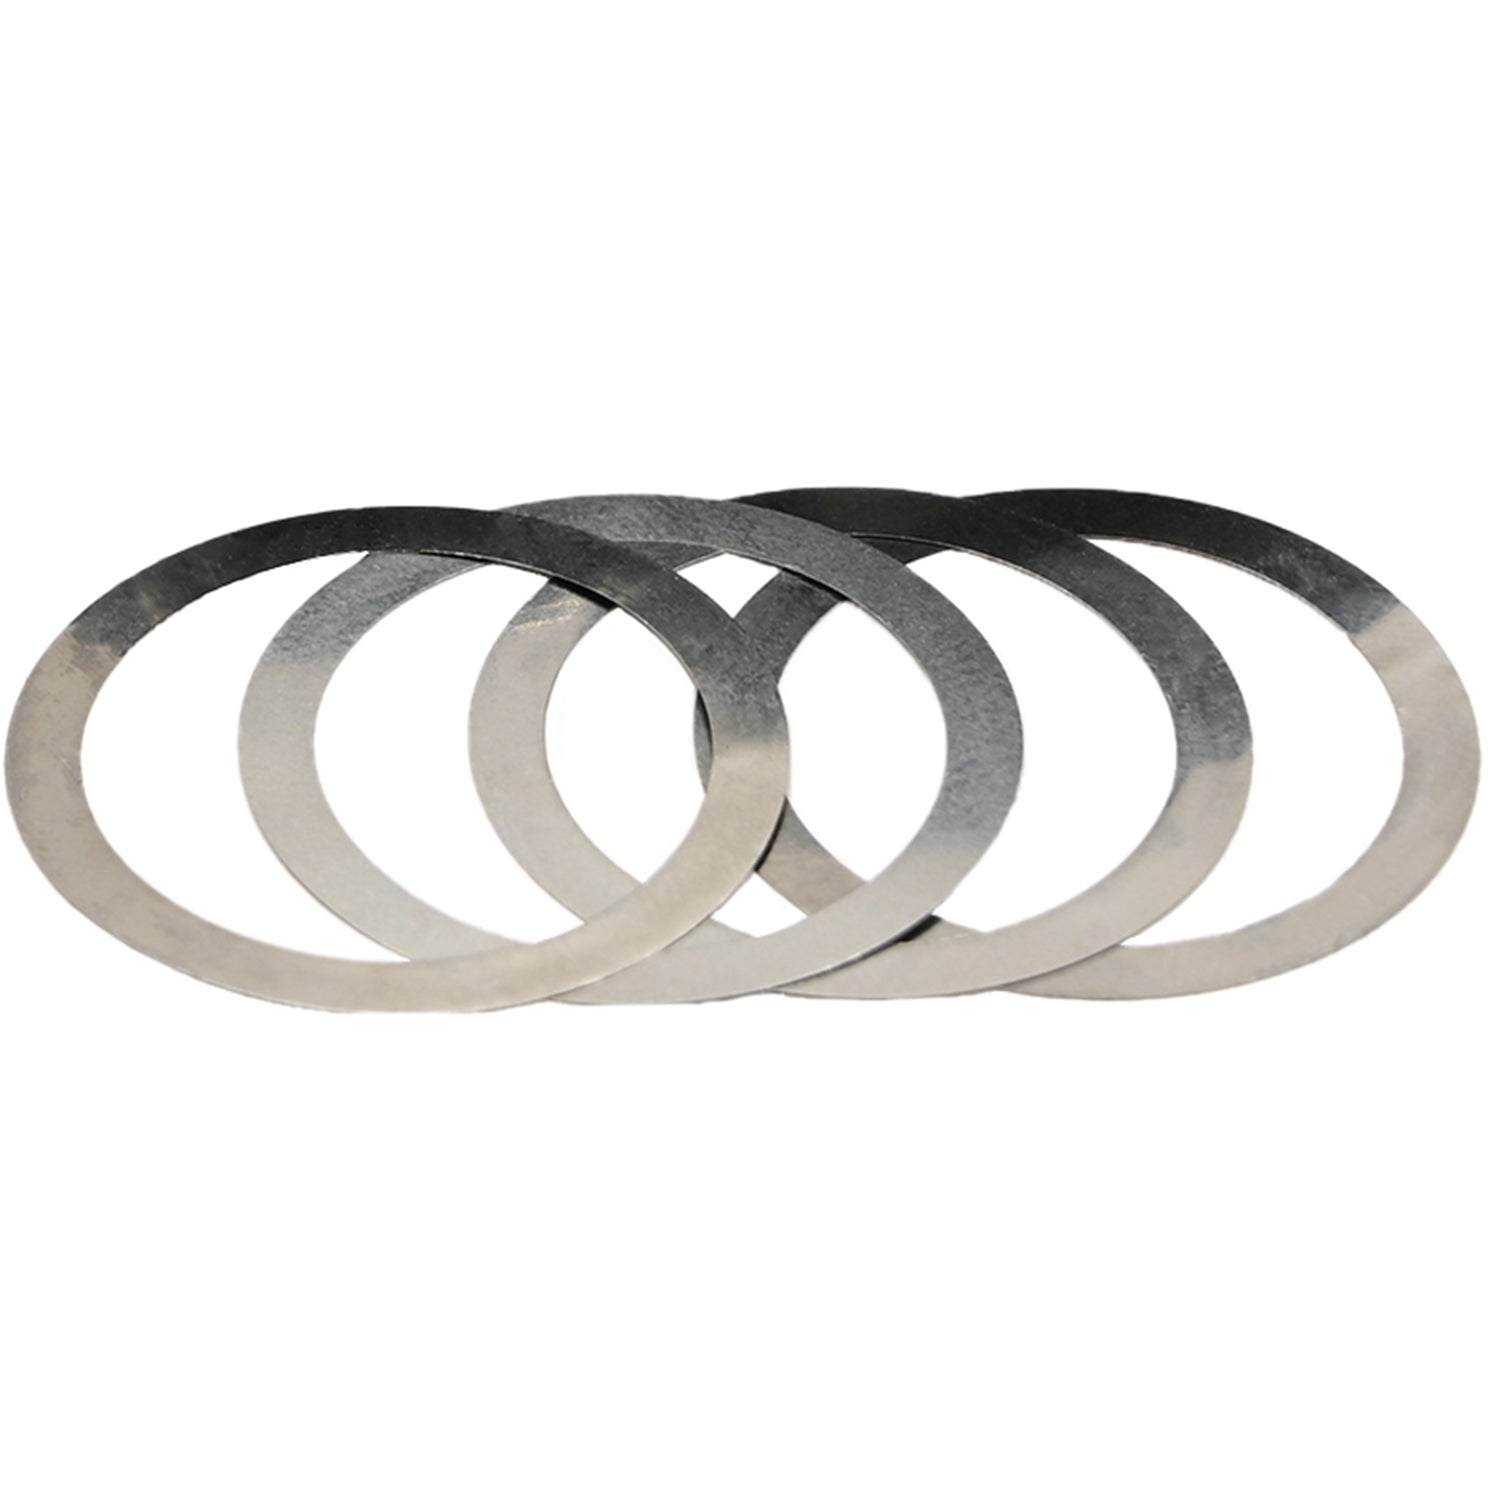 Four flat circular stainless steel shims stacked on one another on a white background. 